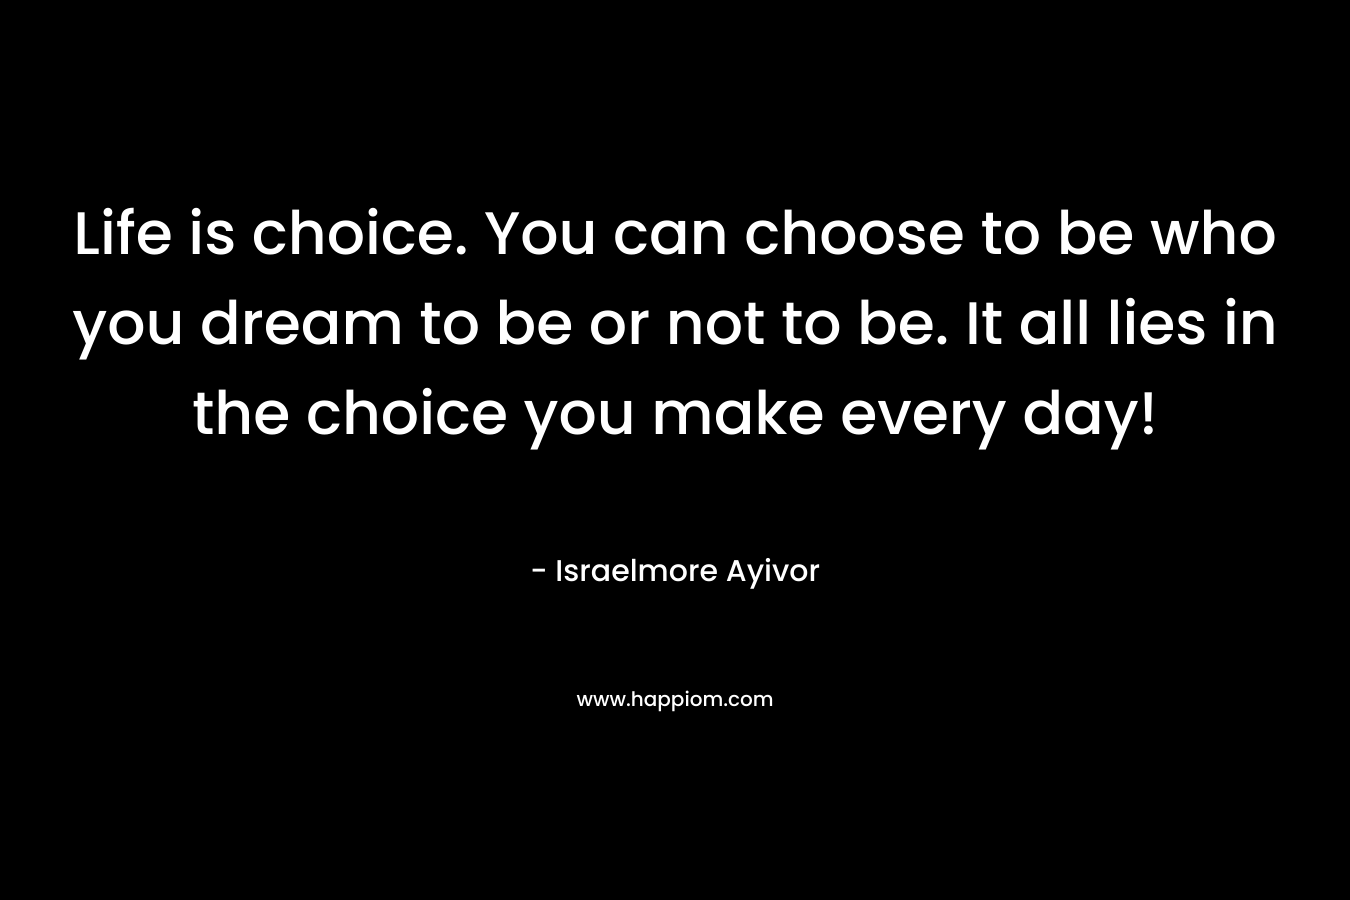 Life is choice. You can choose to be who you dream to be or not to be. It all lies in the choice you make every day!